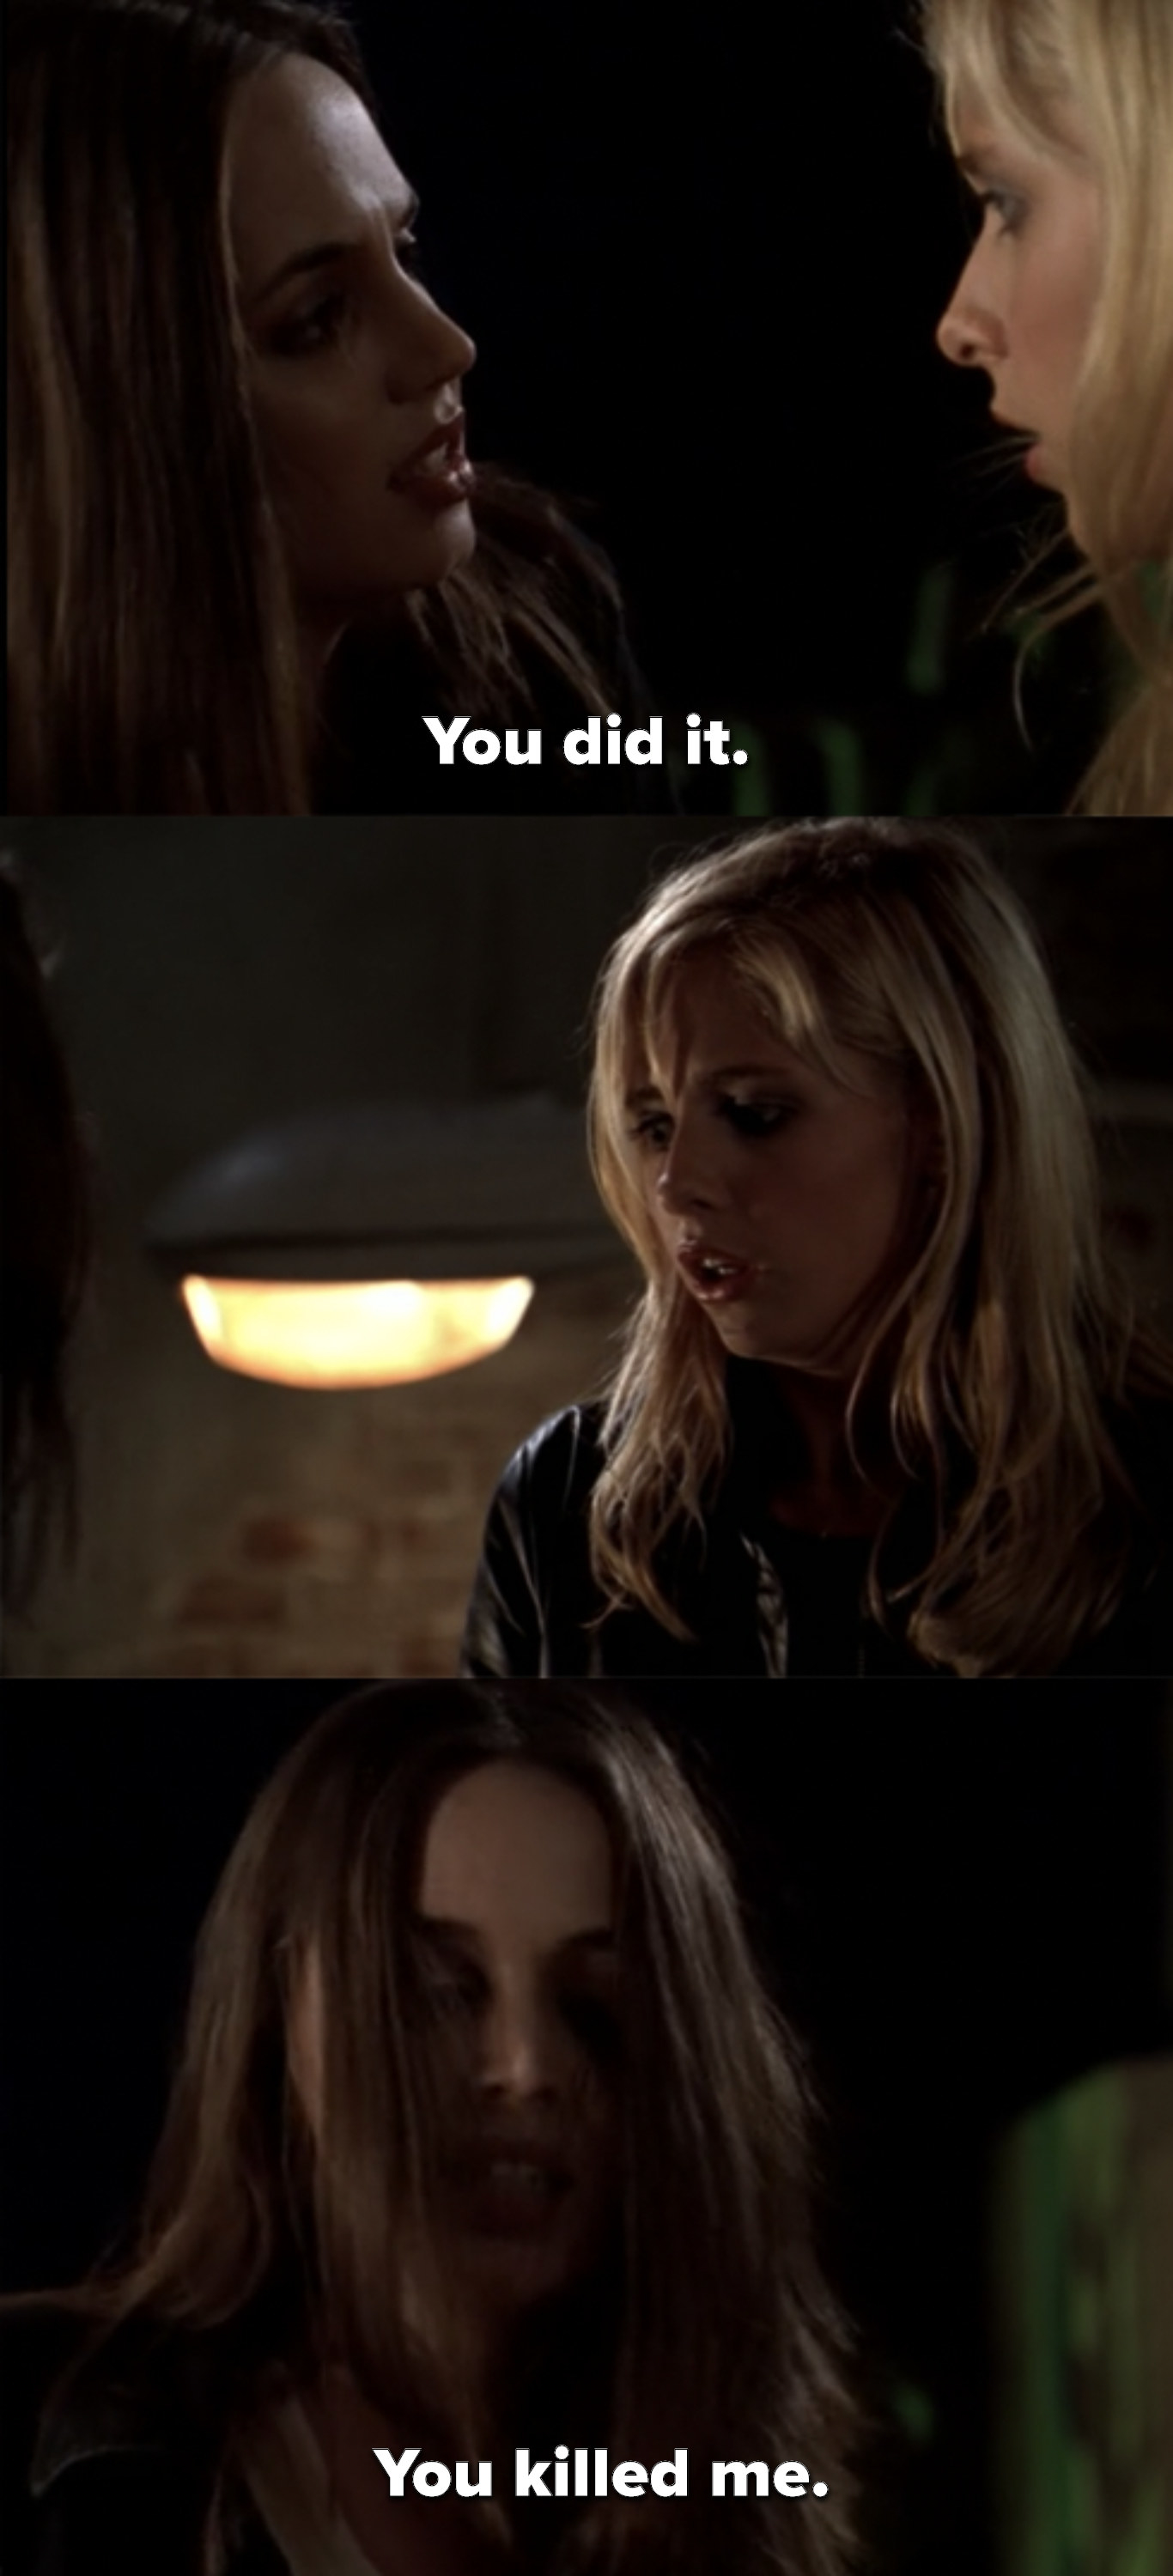 Buffy stabs faith, who says &quot;you did it, you killed me&quot; as Buffy looks shocked